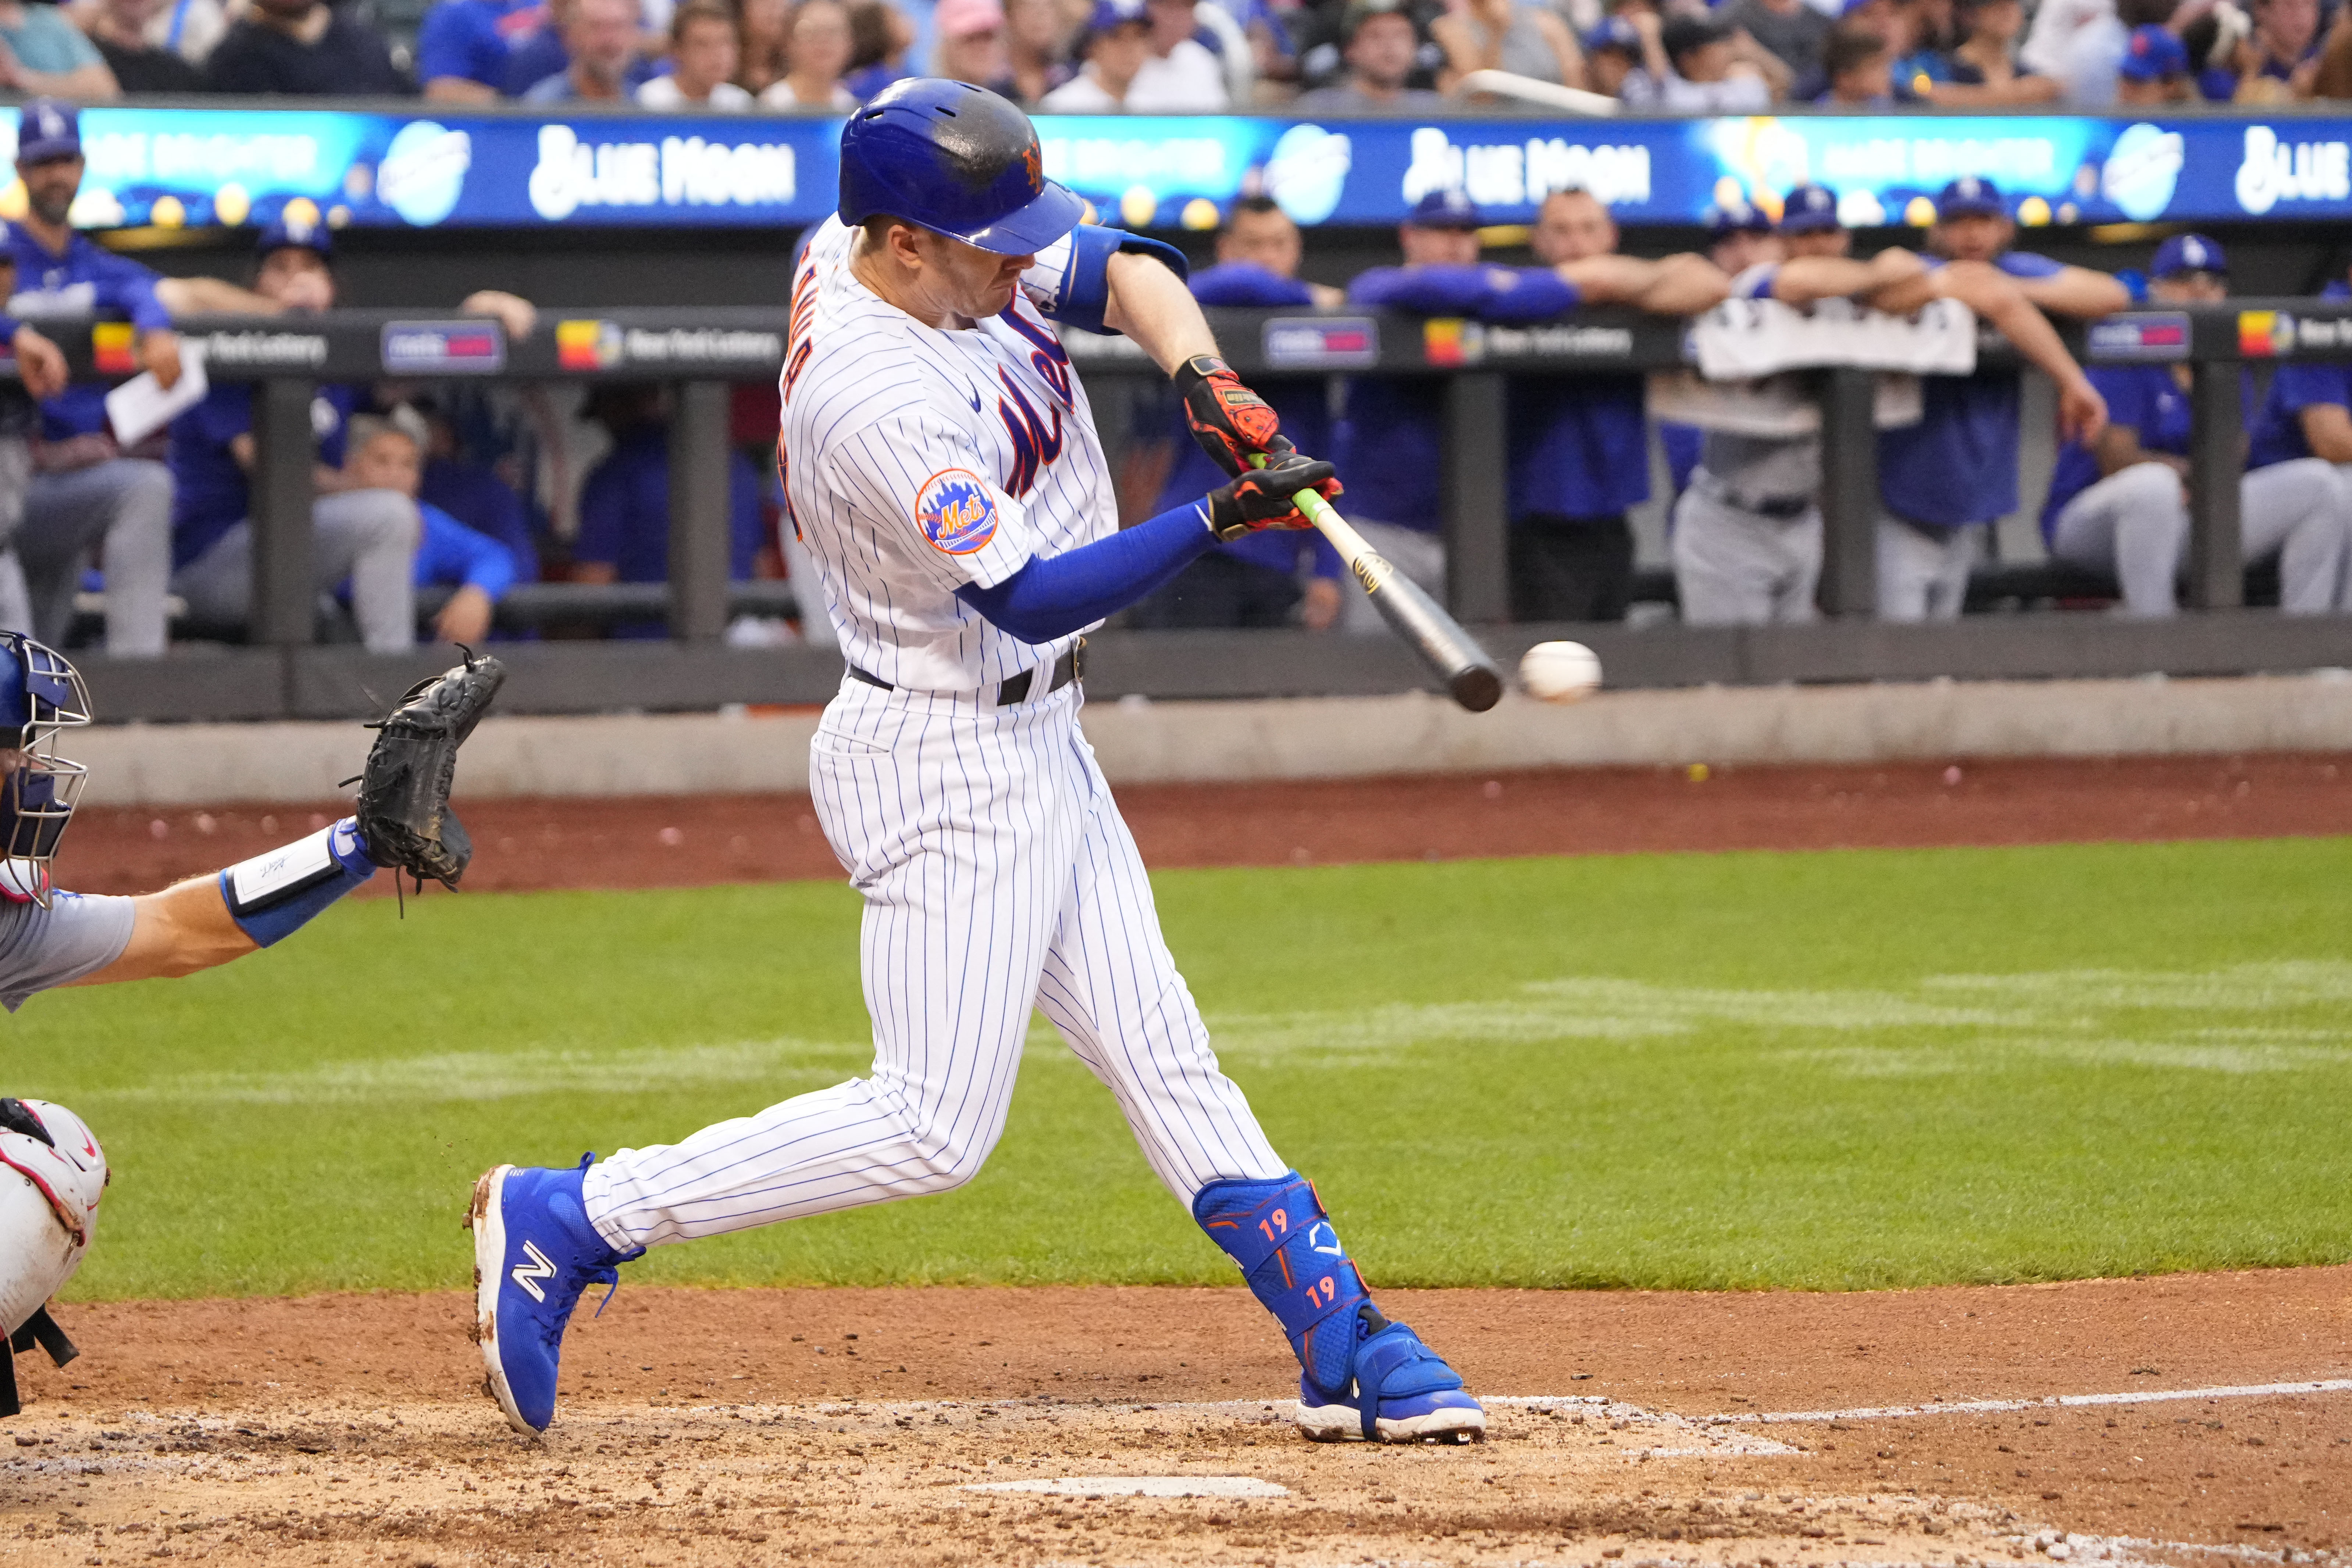 NY Mets: Luis Guillorme walk-off double delivers win over Dodgers